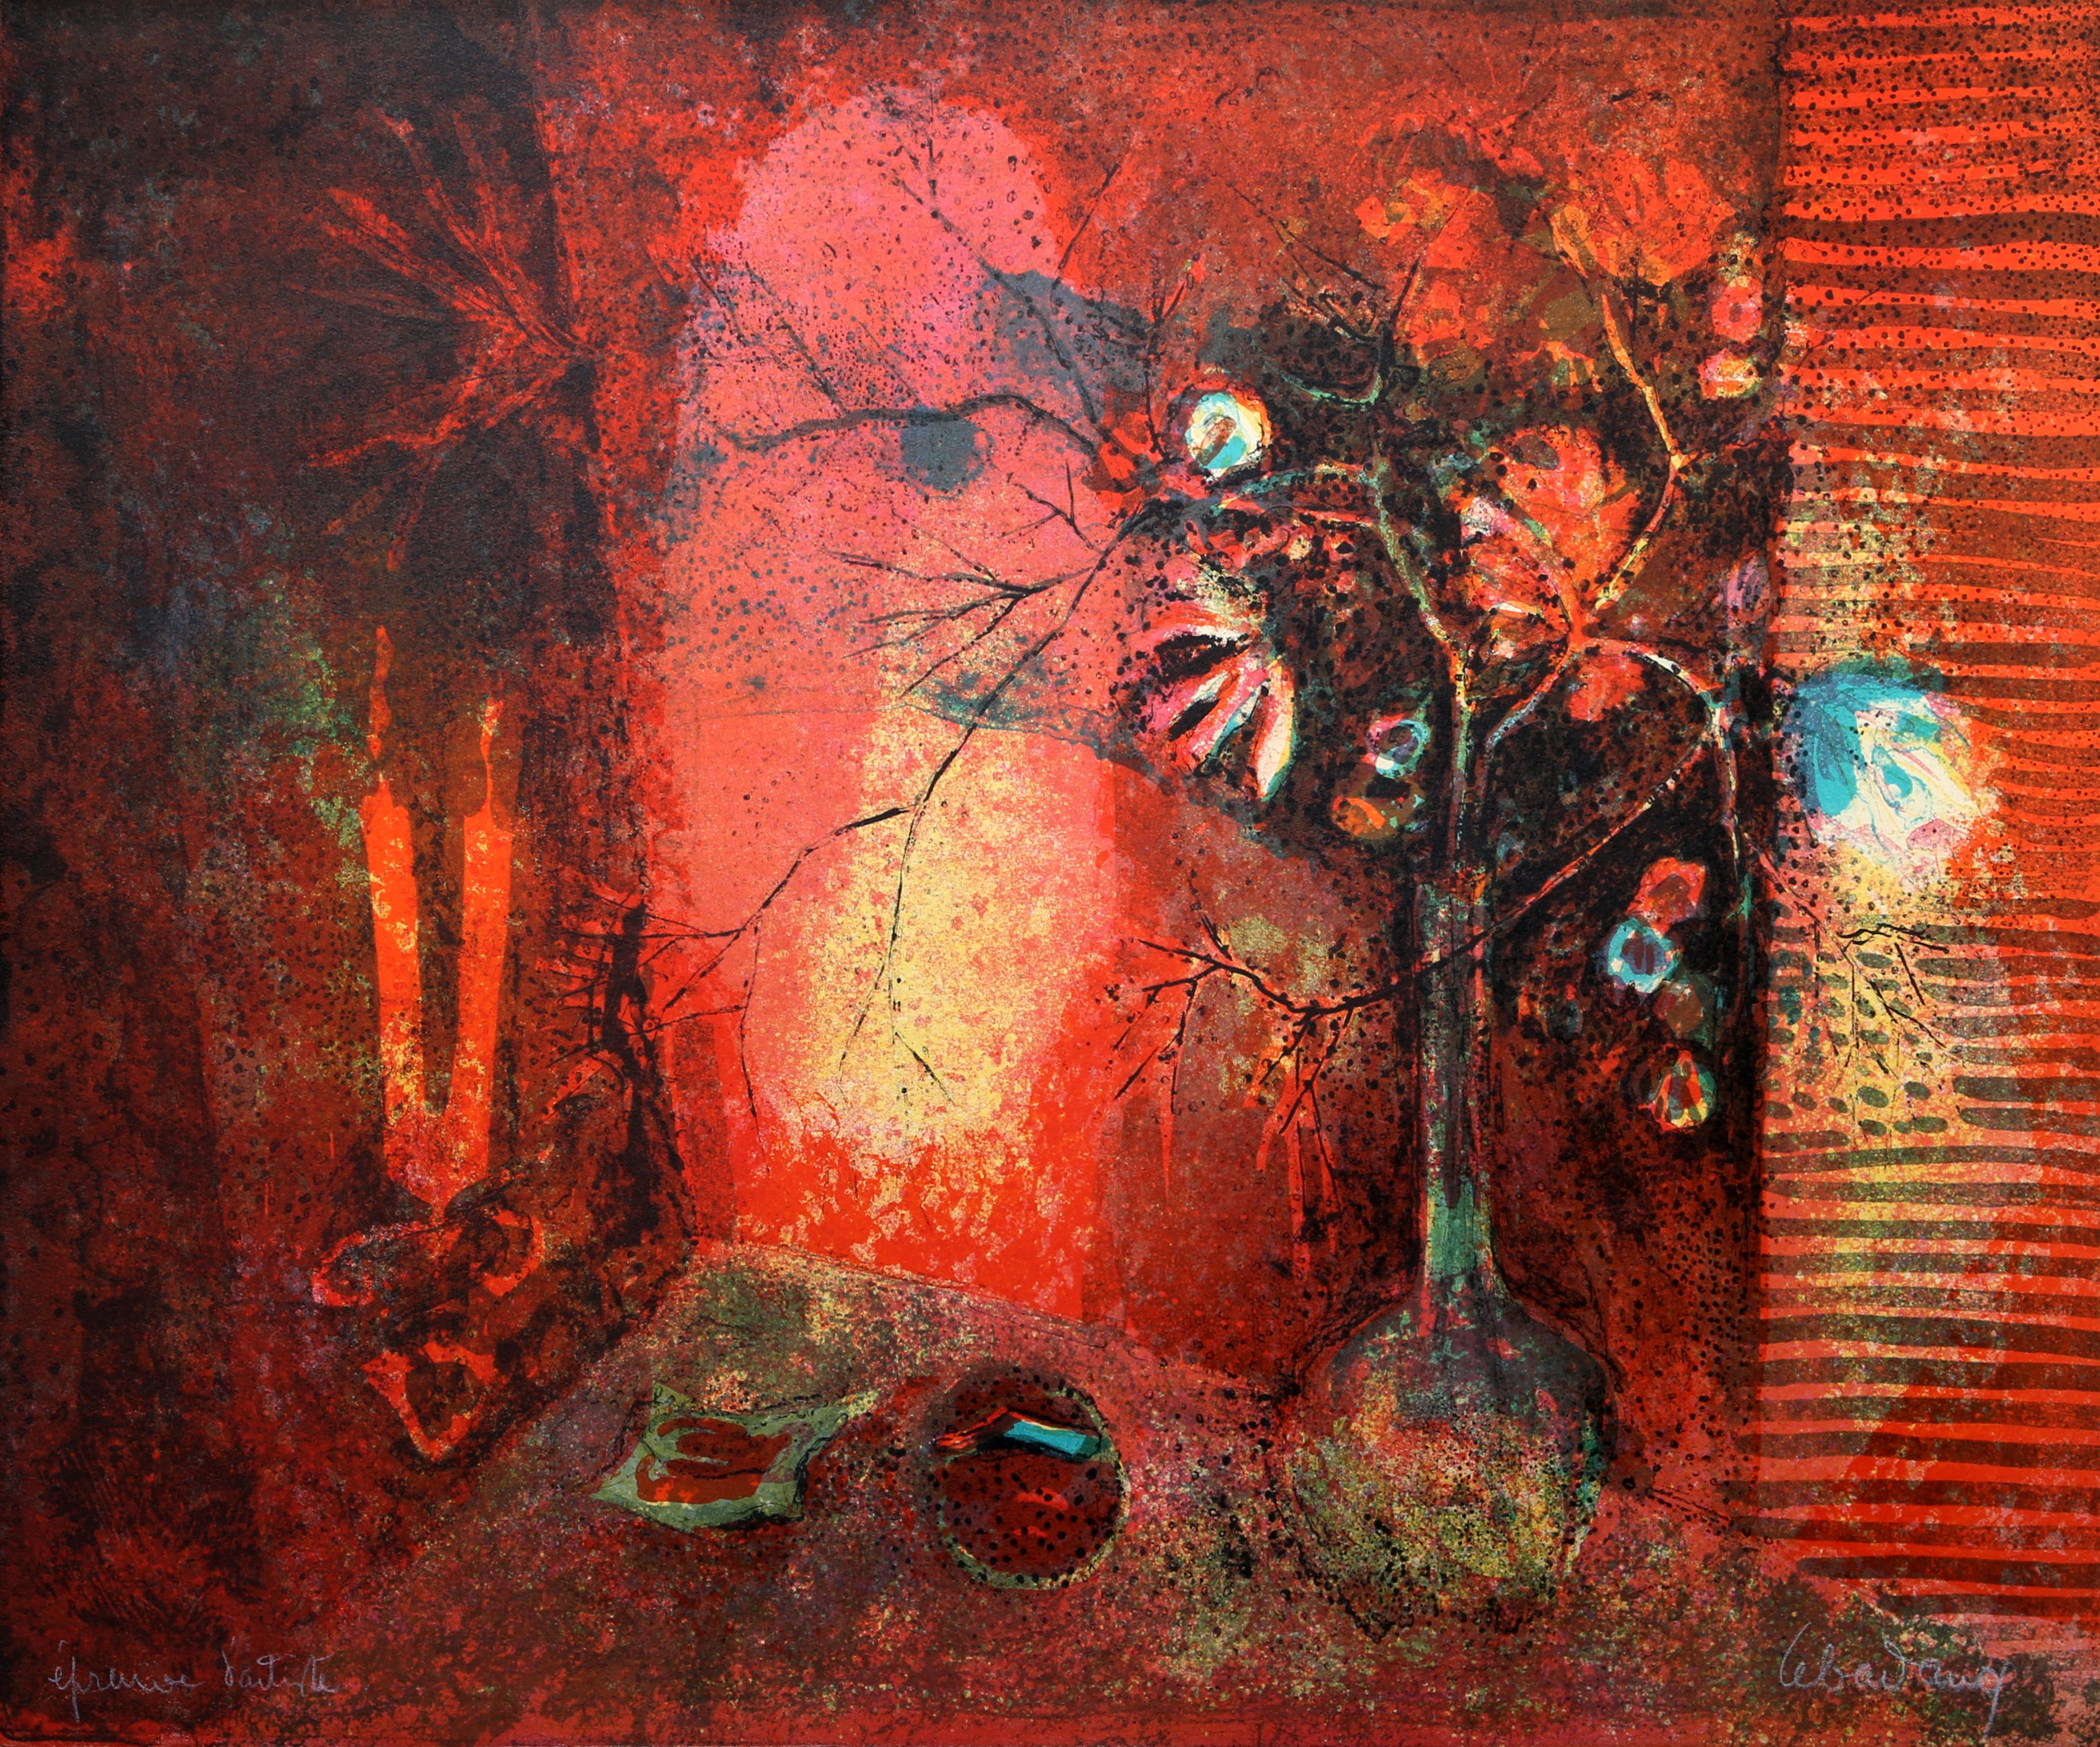 Still Life in Red, Lithograph by Lebadang